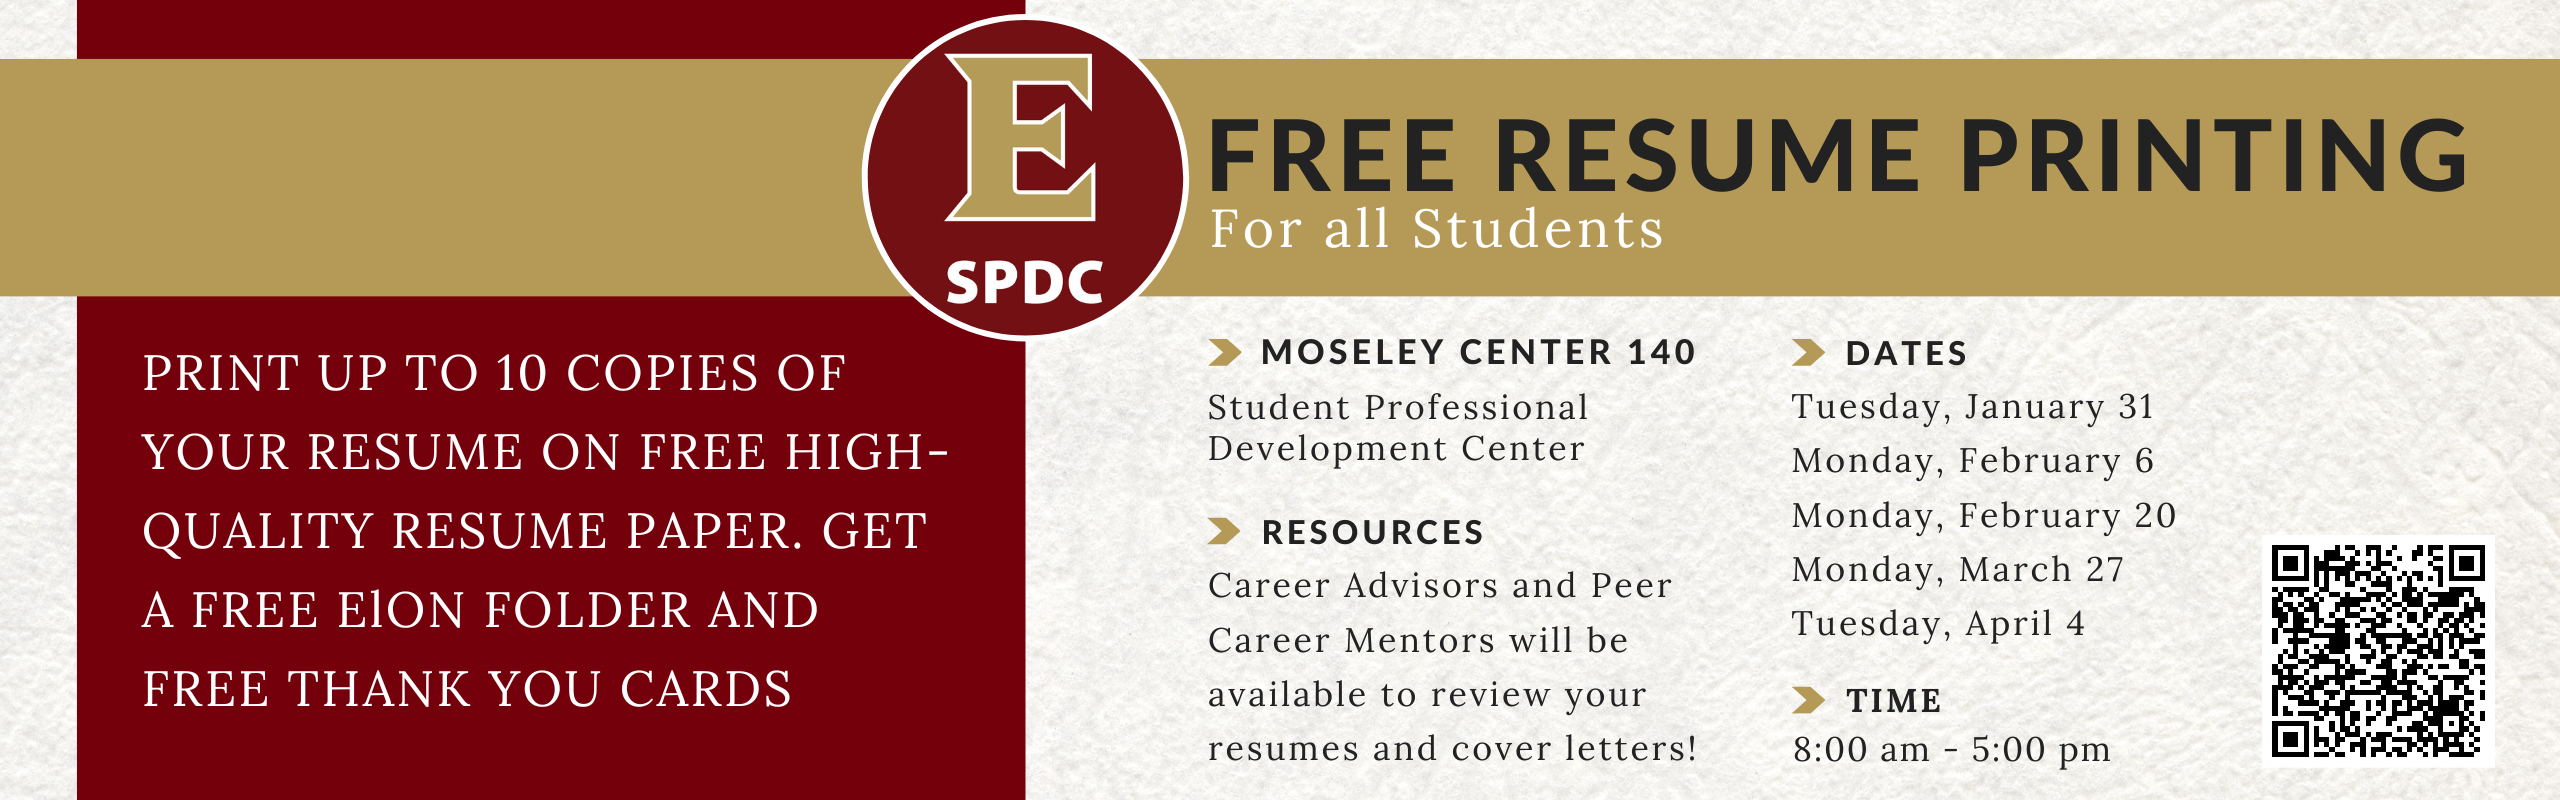 Free Resume printing, Elon Folders, and Thank you cards offered throughout the year in Moseley 140 the Student Professional Development Center (SPDC)